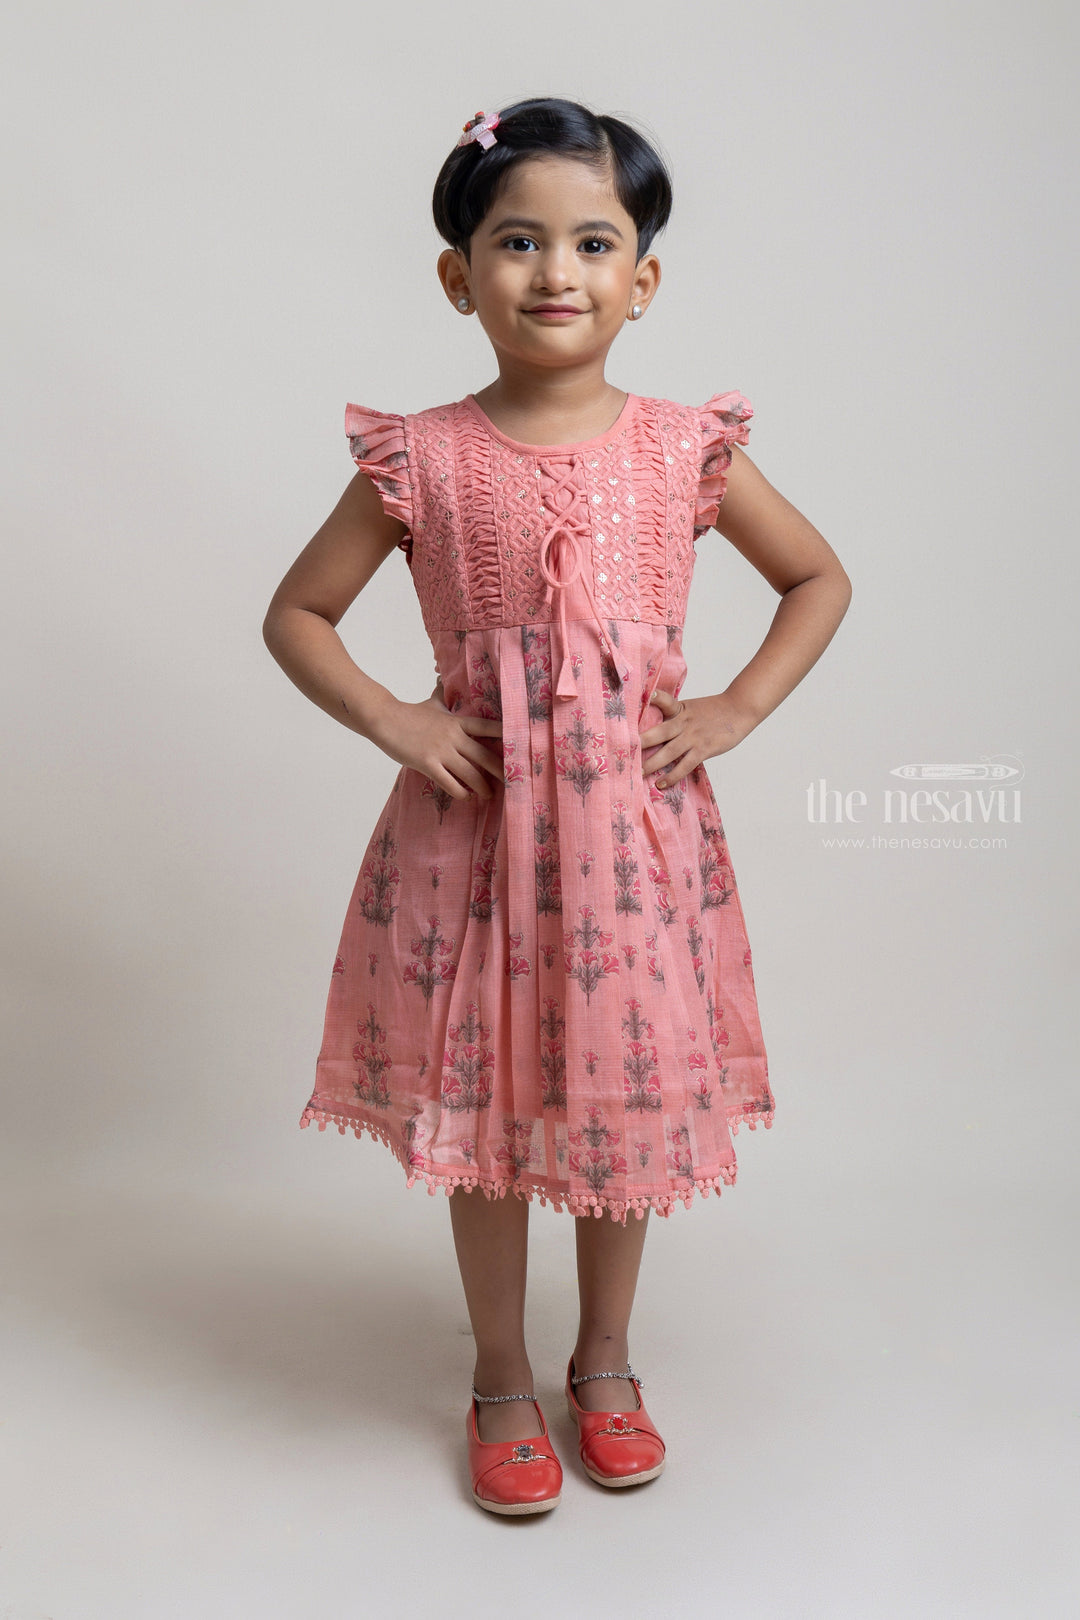 The Nesavu Girls Cotton Frock Pretty Salmon Floral Embroidered Yoke And Floral Printed Cotton Frock for Girls Nesavu 22 (4Y) / Salmon / Cotton GFC1025B Fantastic Floral Printed Cotton Frock For Girls | Premium Cotton Frocks | The Nesavu